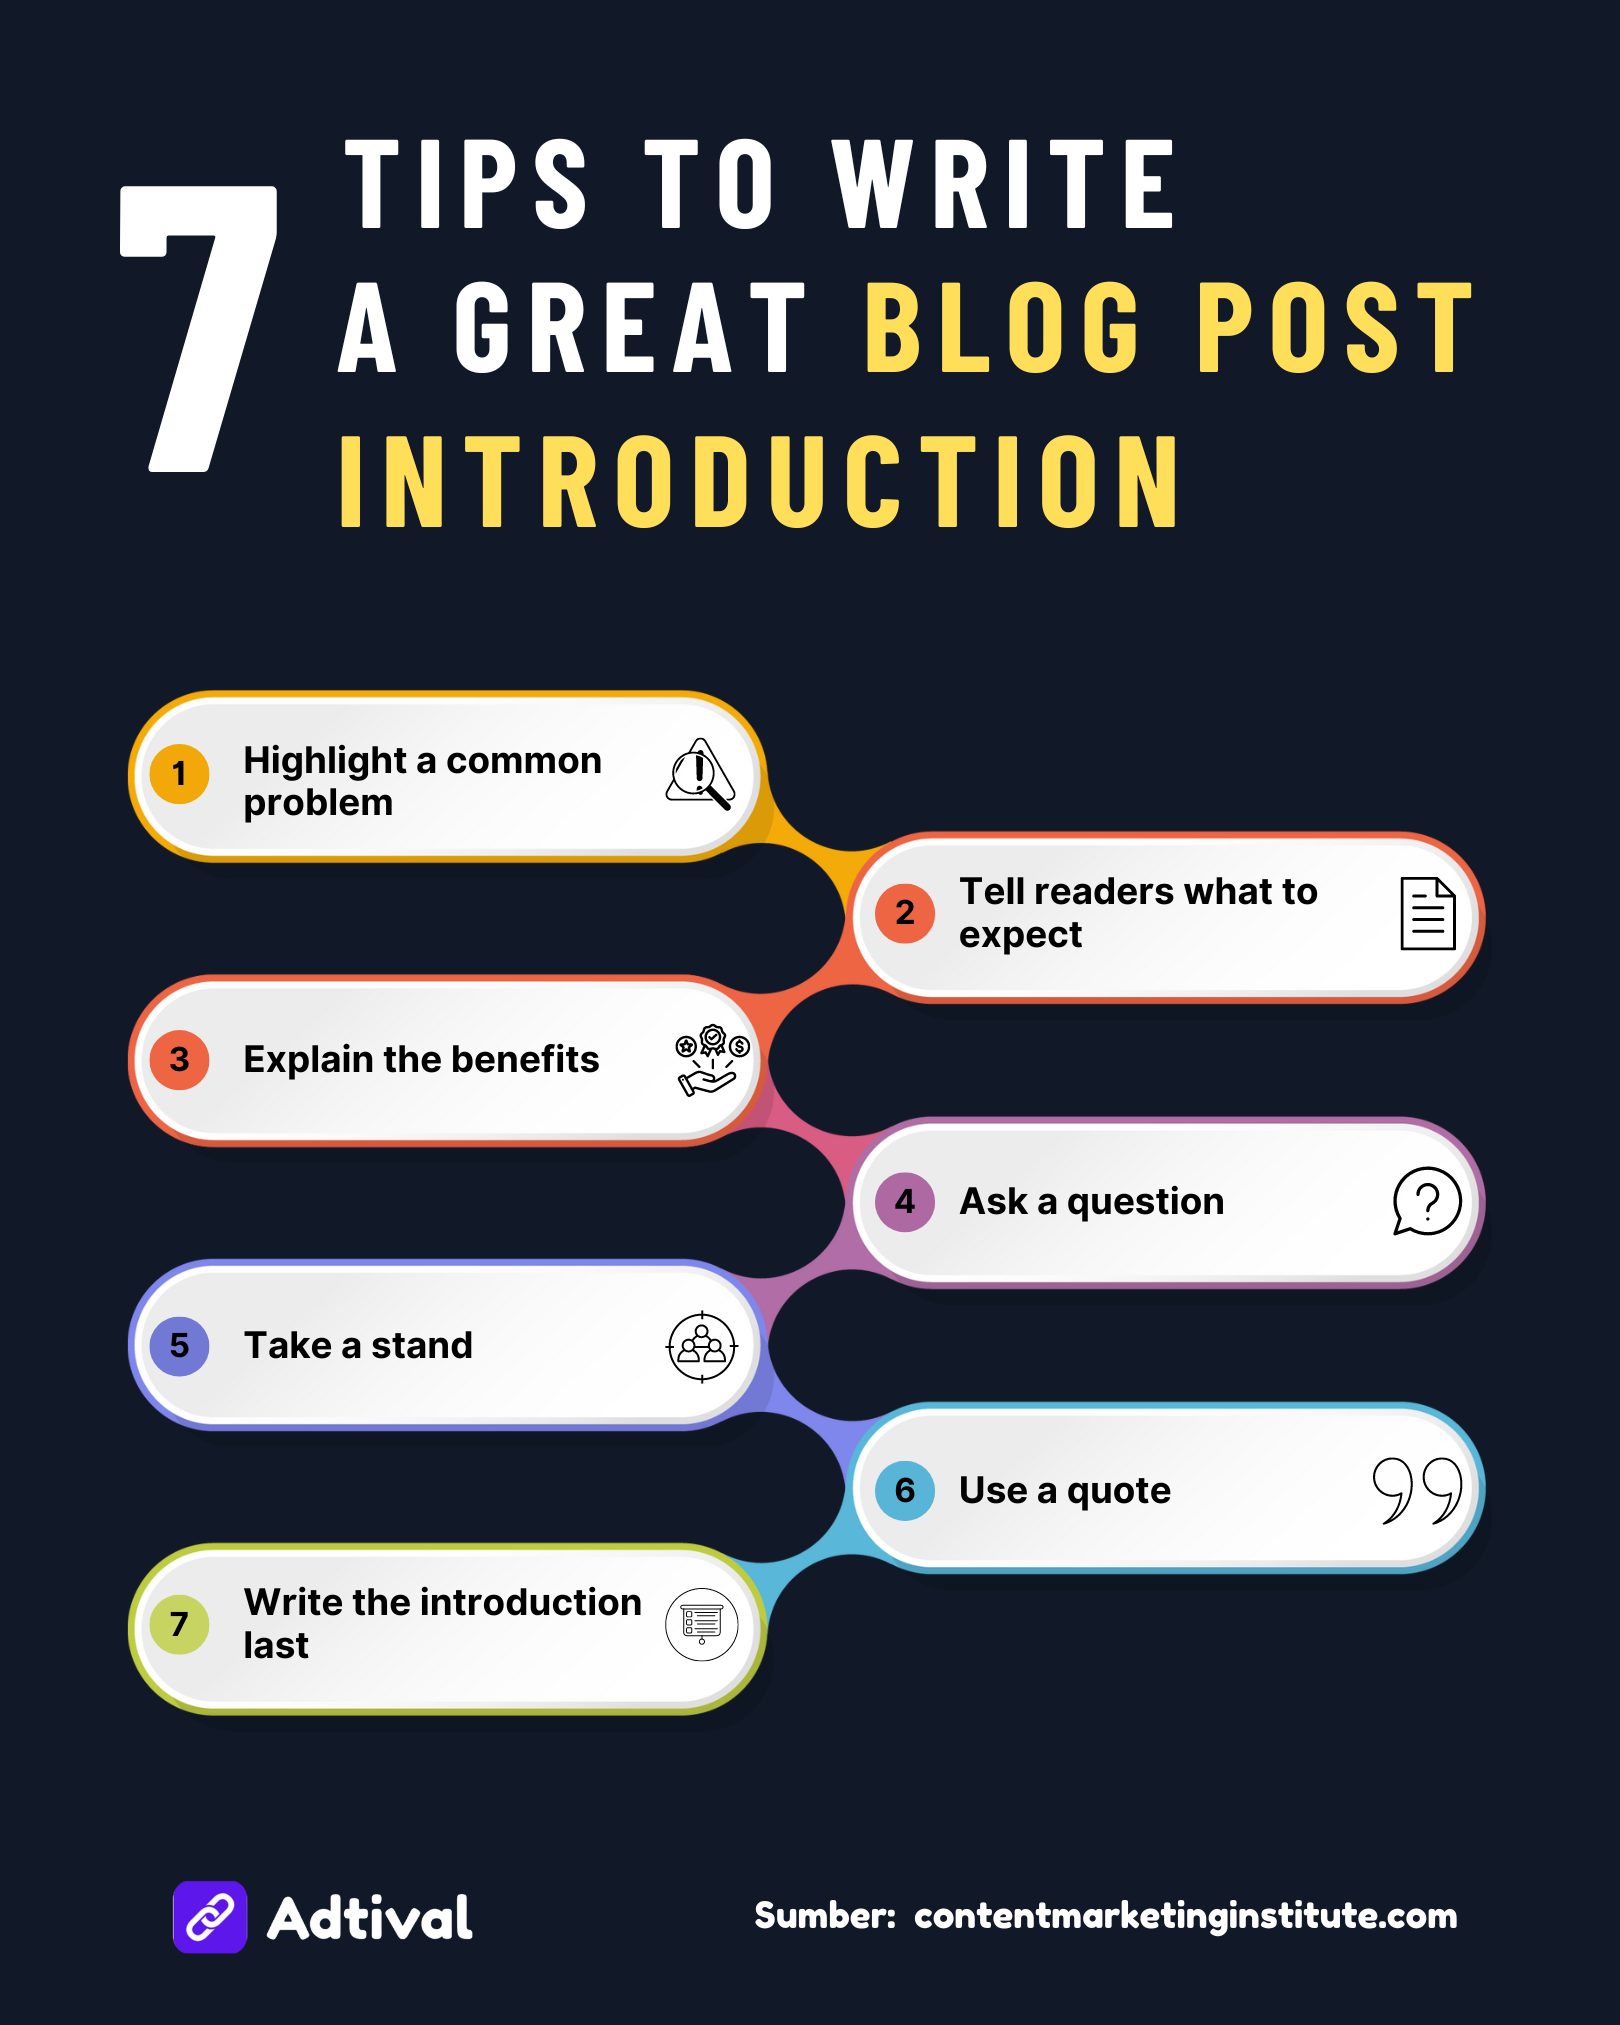 7 Tips to Write a Great Blog Post Introduction